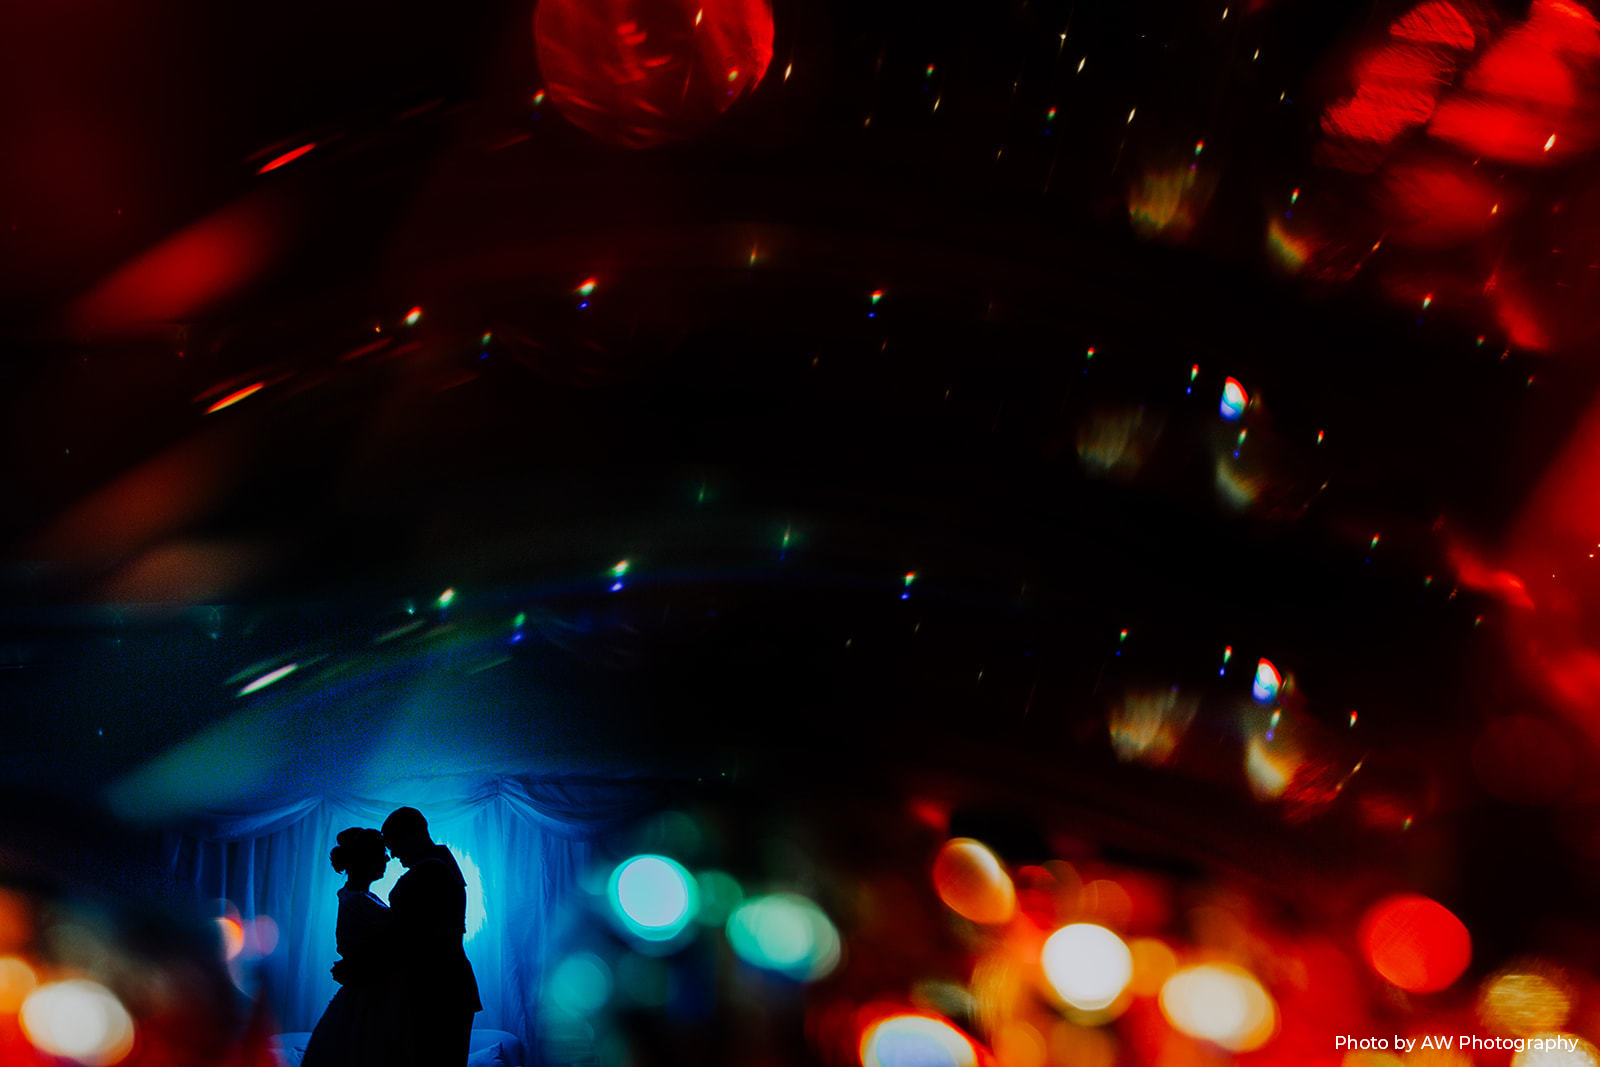 Danielle and Dan in silhouette with Christmas lights. Photo by AW Photography 